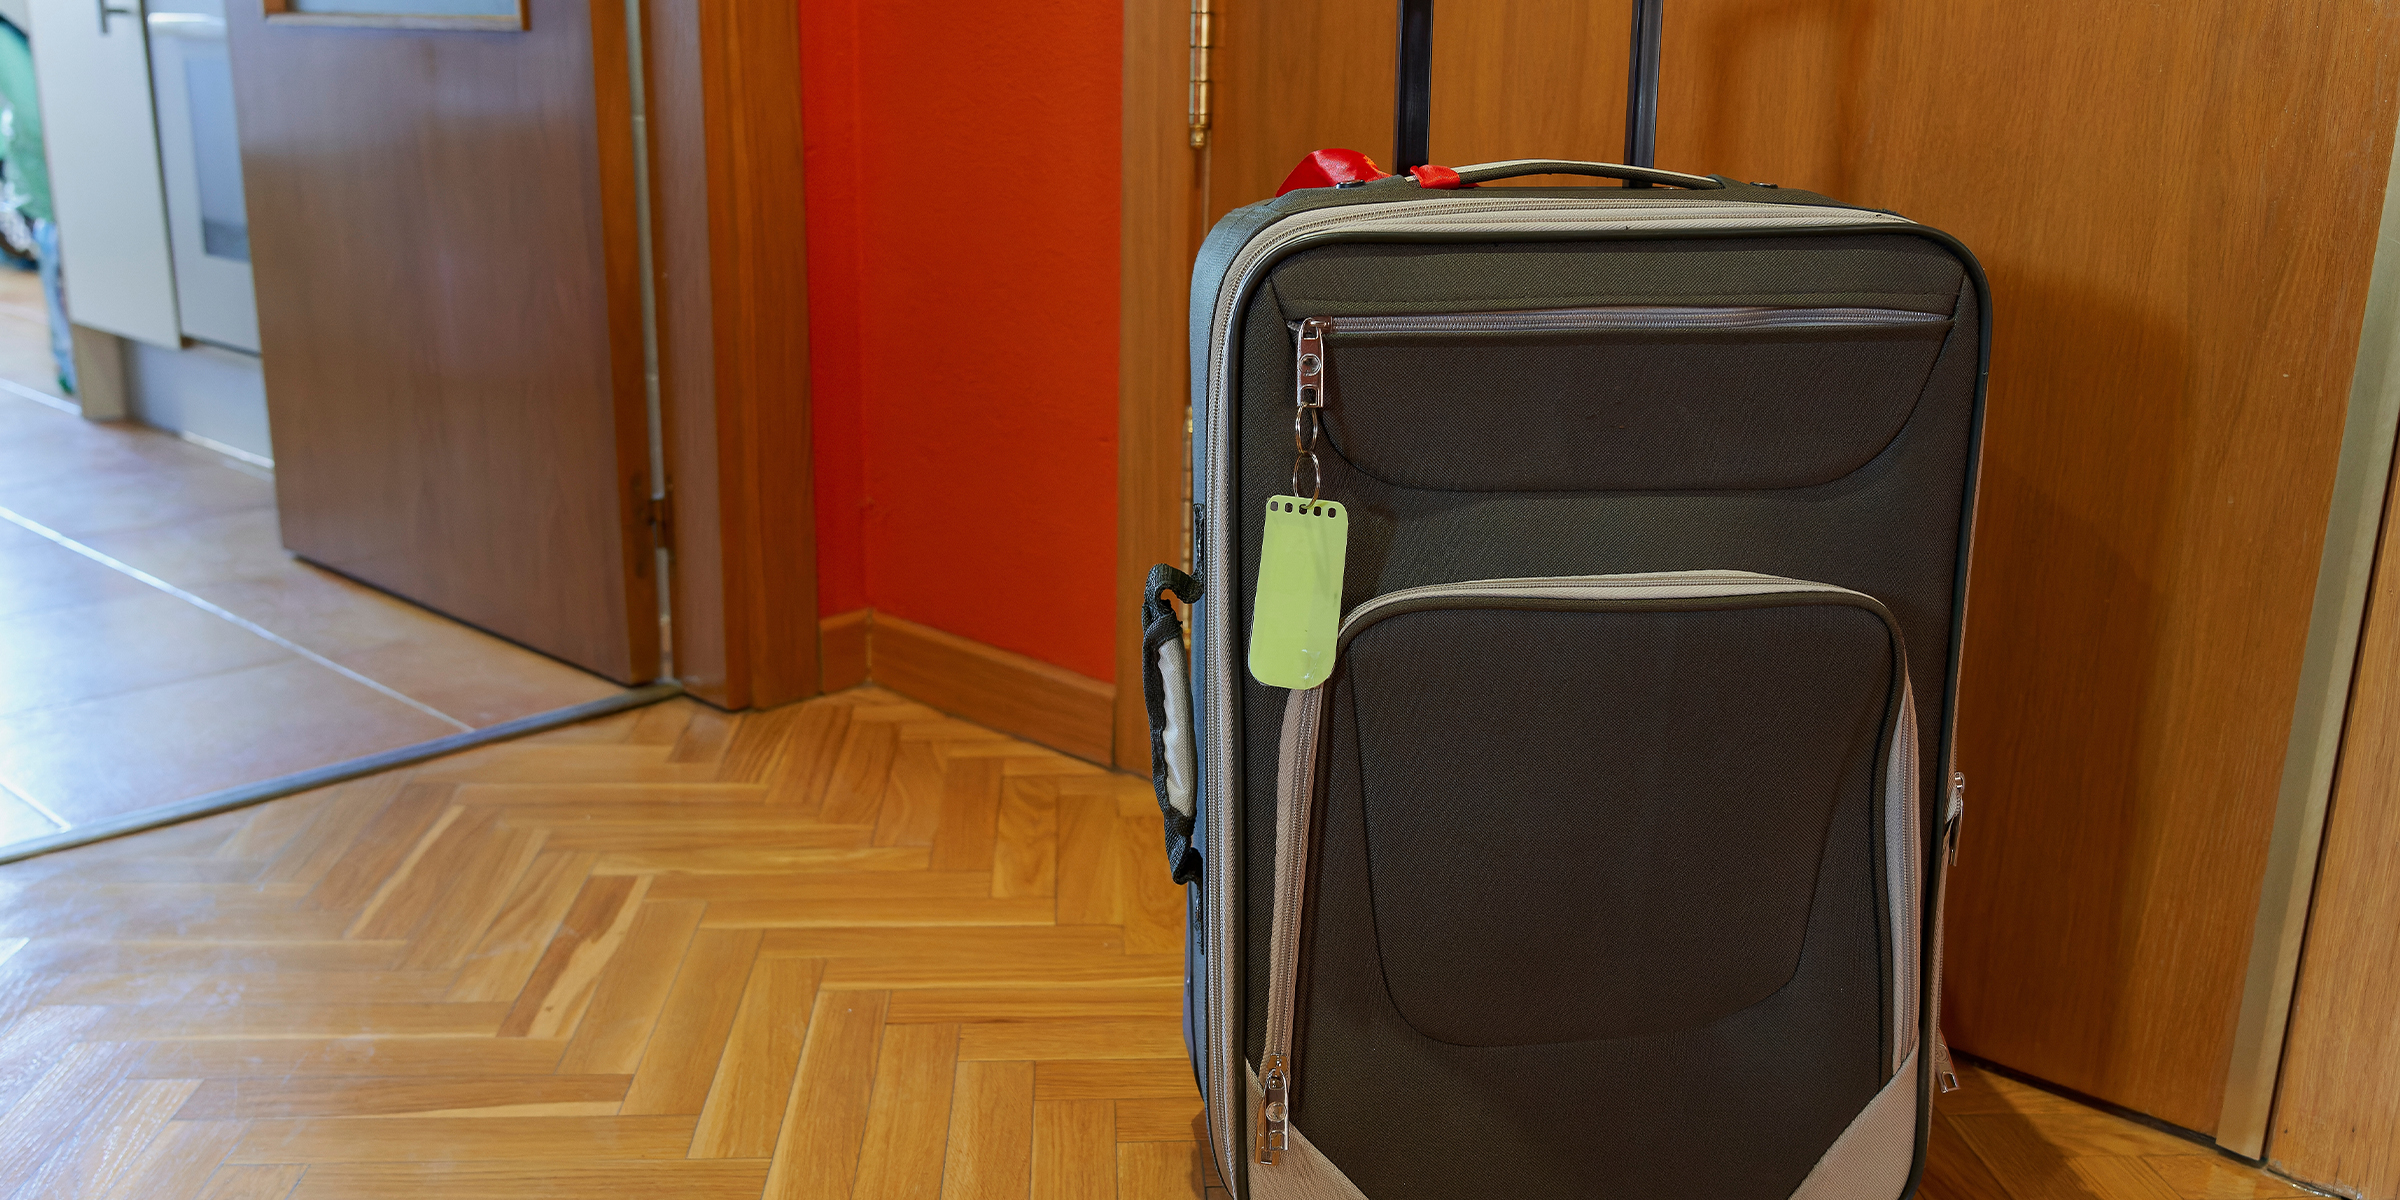 A suitcase placed outside an apartment front door | Source: Shutterstock